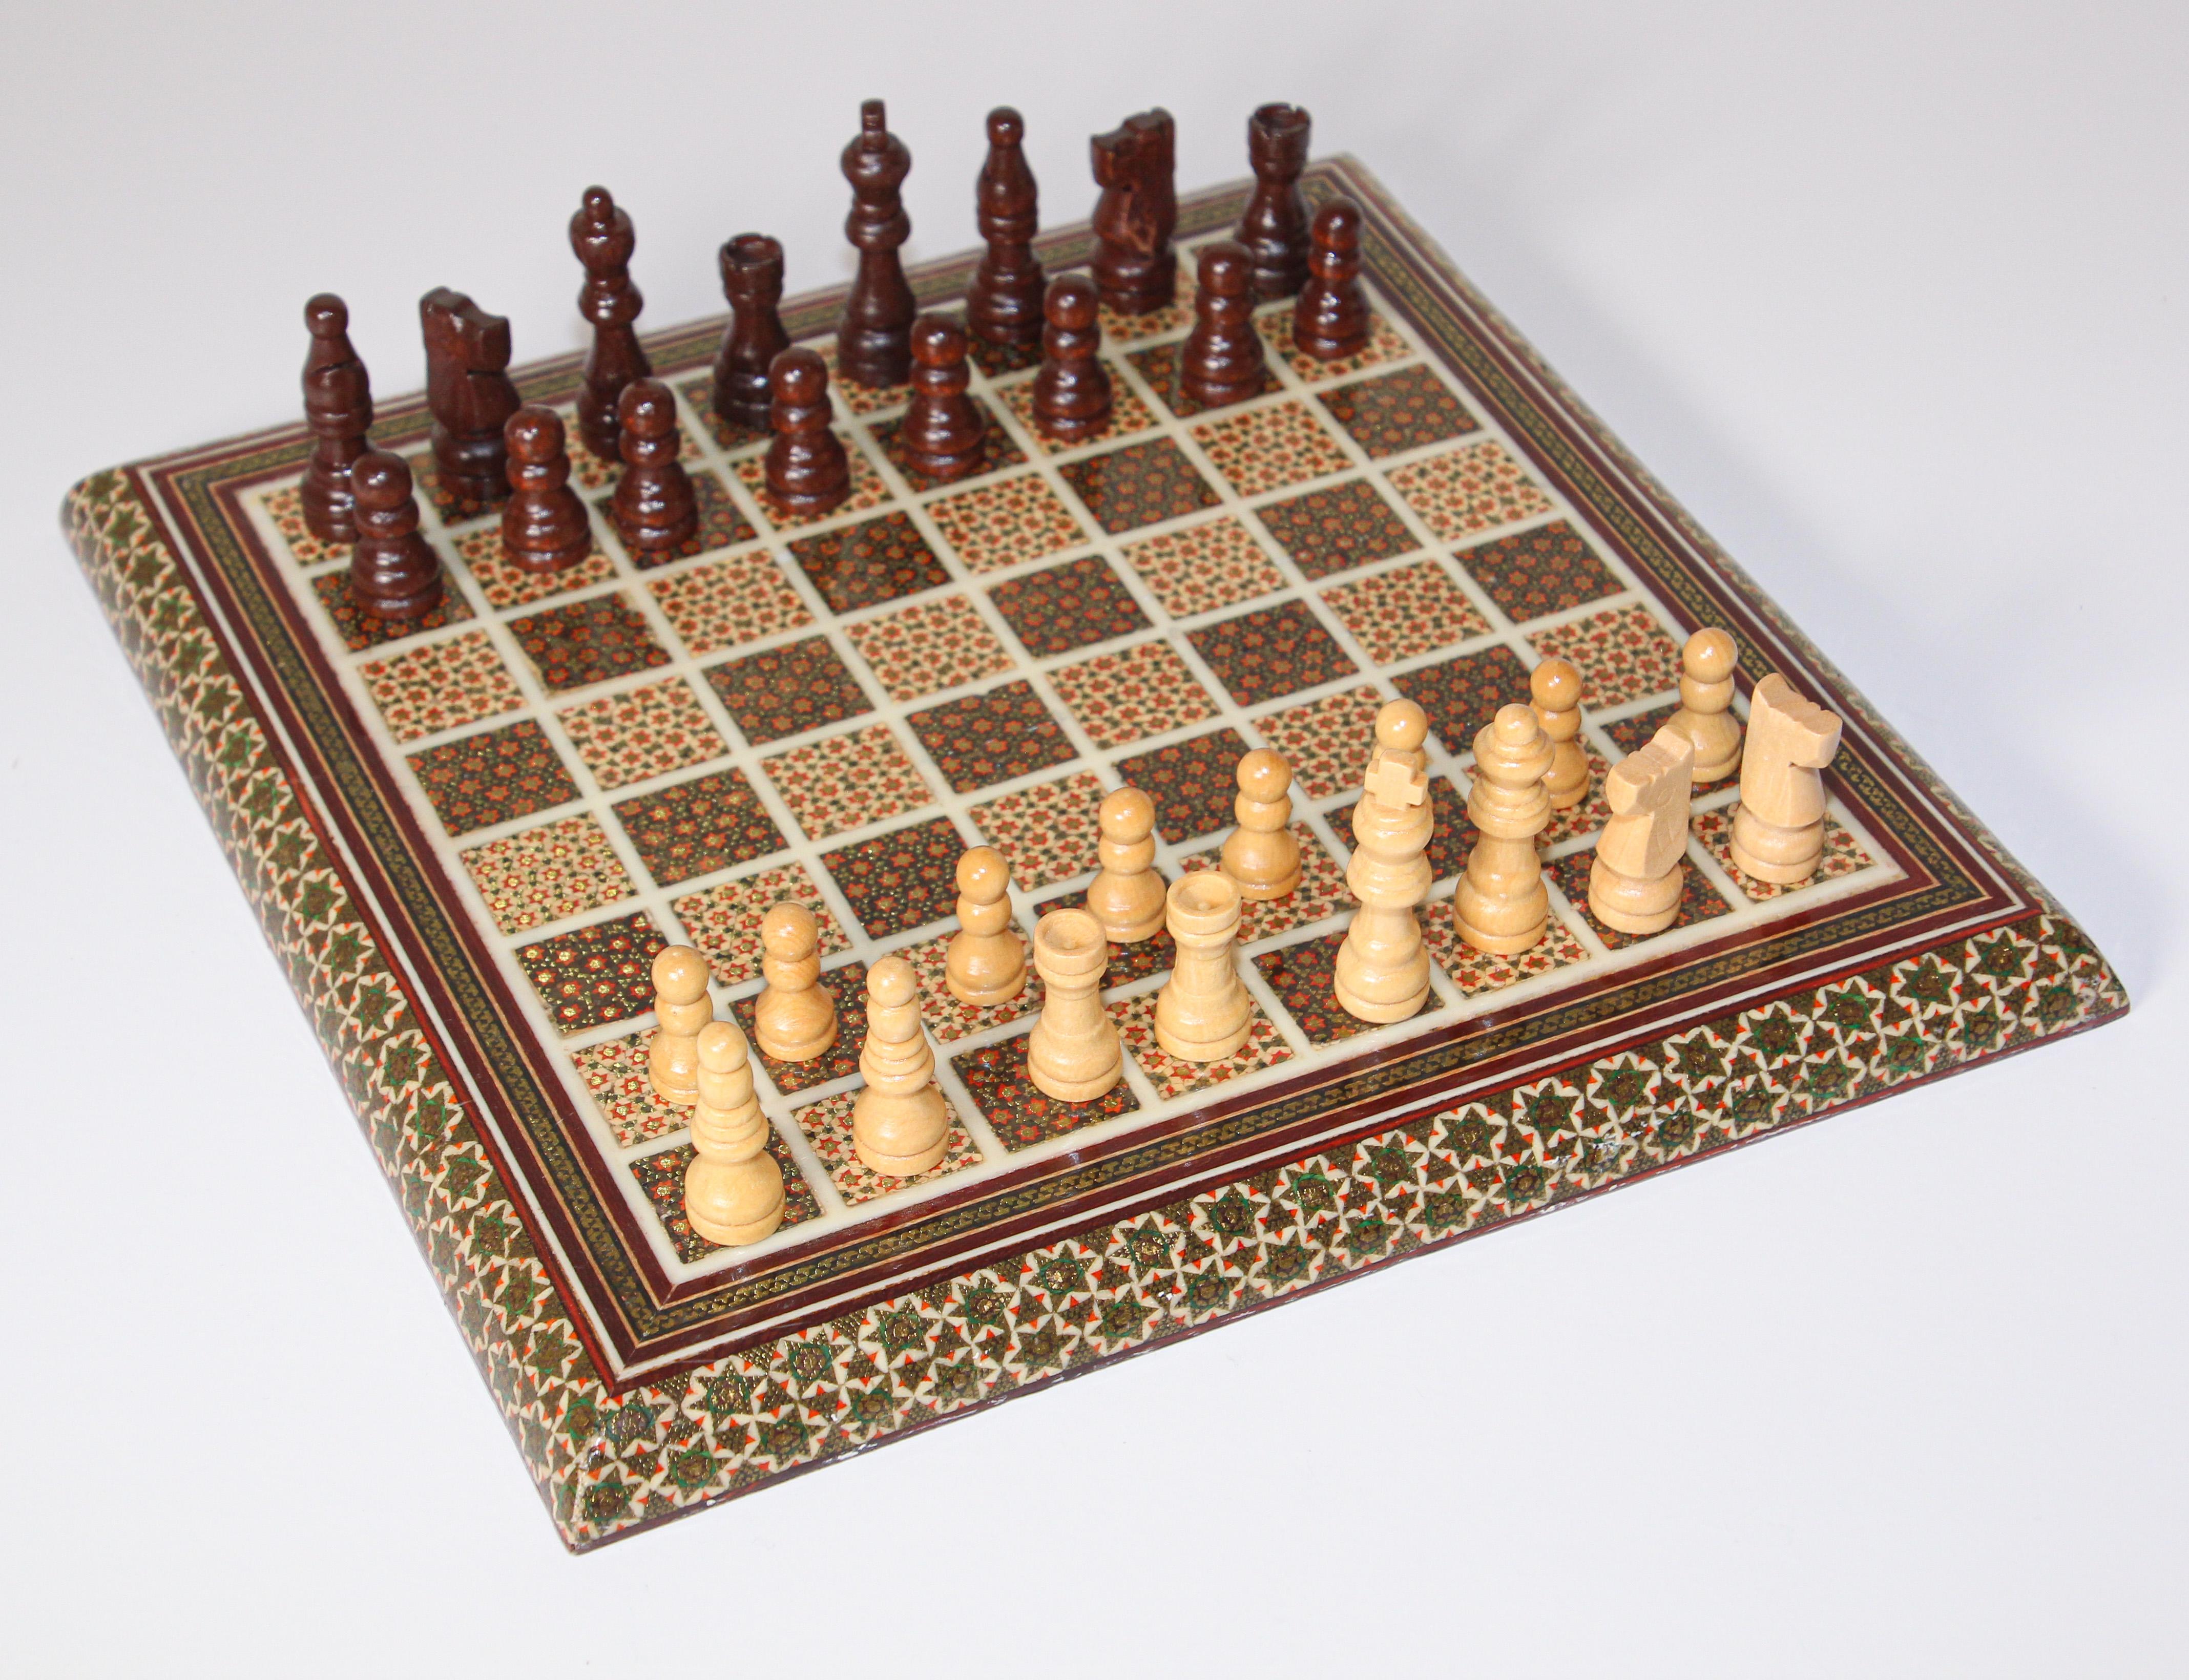 Intricately inlaid handcrafted Persian chess game board and pieces.
Handcrafted beautiful Middle Eastern Persian Khatam chess board covered with very delicate micro mosaic marquetry from the ancient Persian technique of inlaying from arrangements